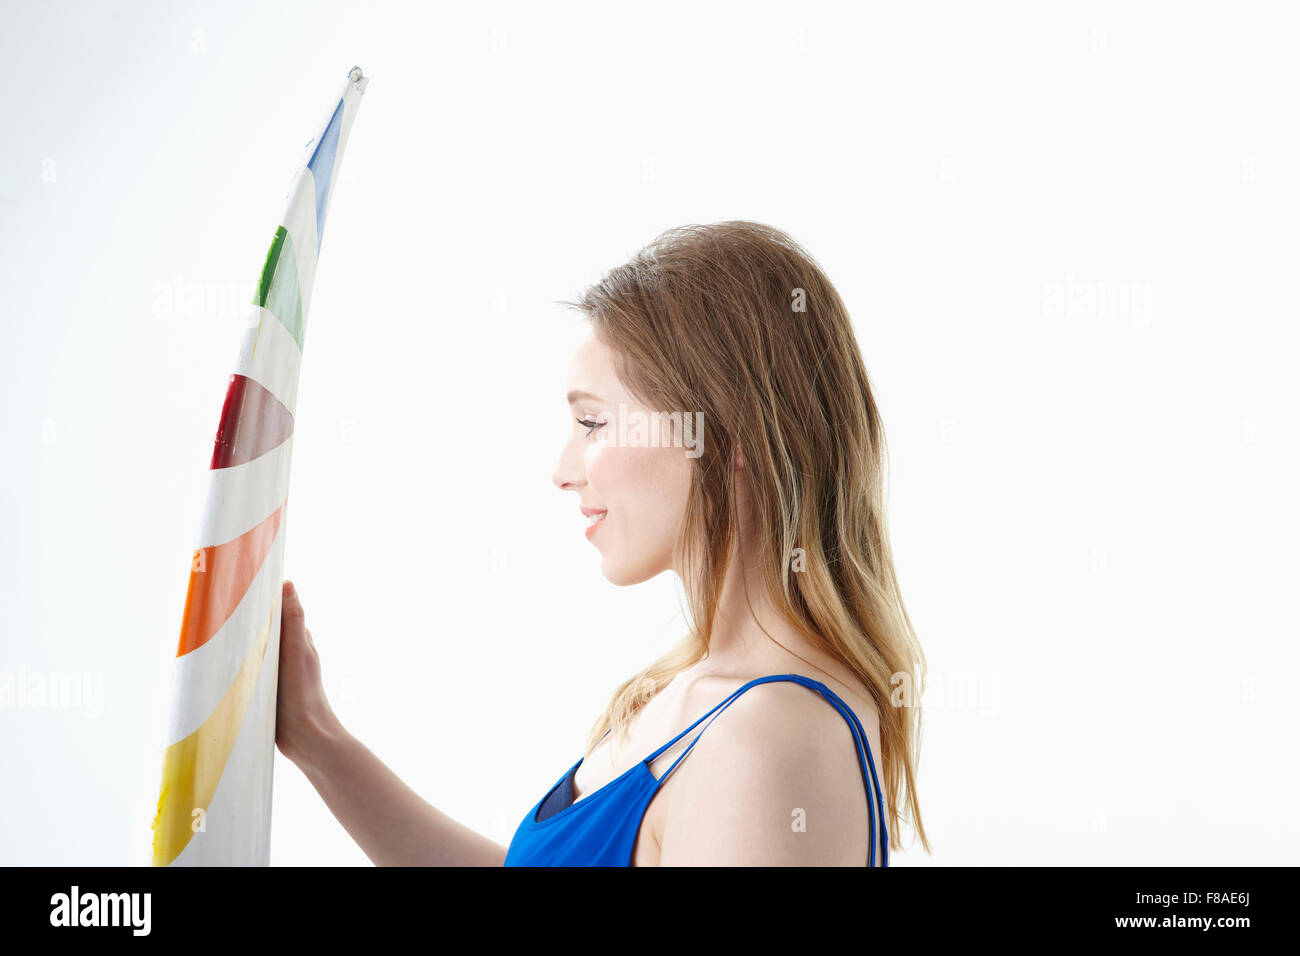 Lady facing a surfing board from the side Stock Photo